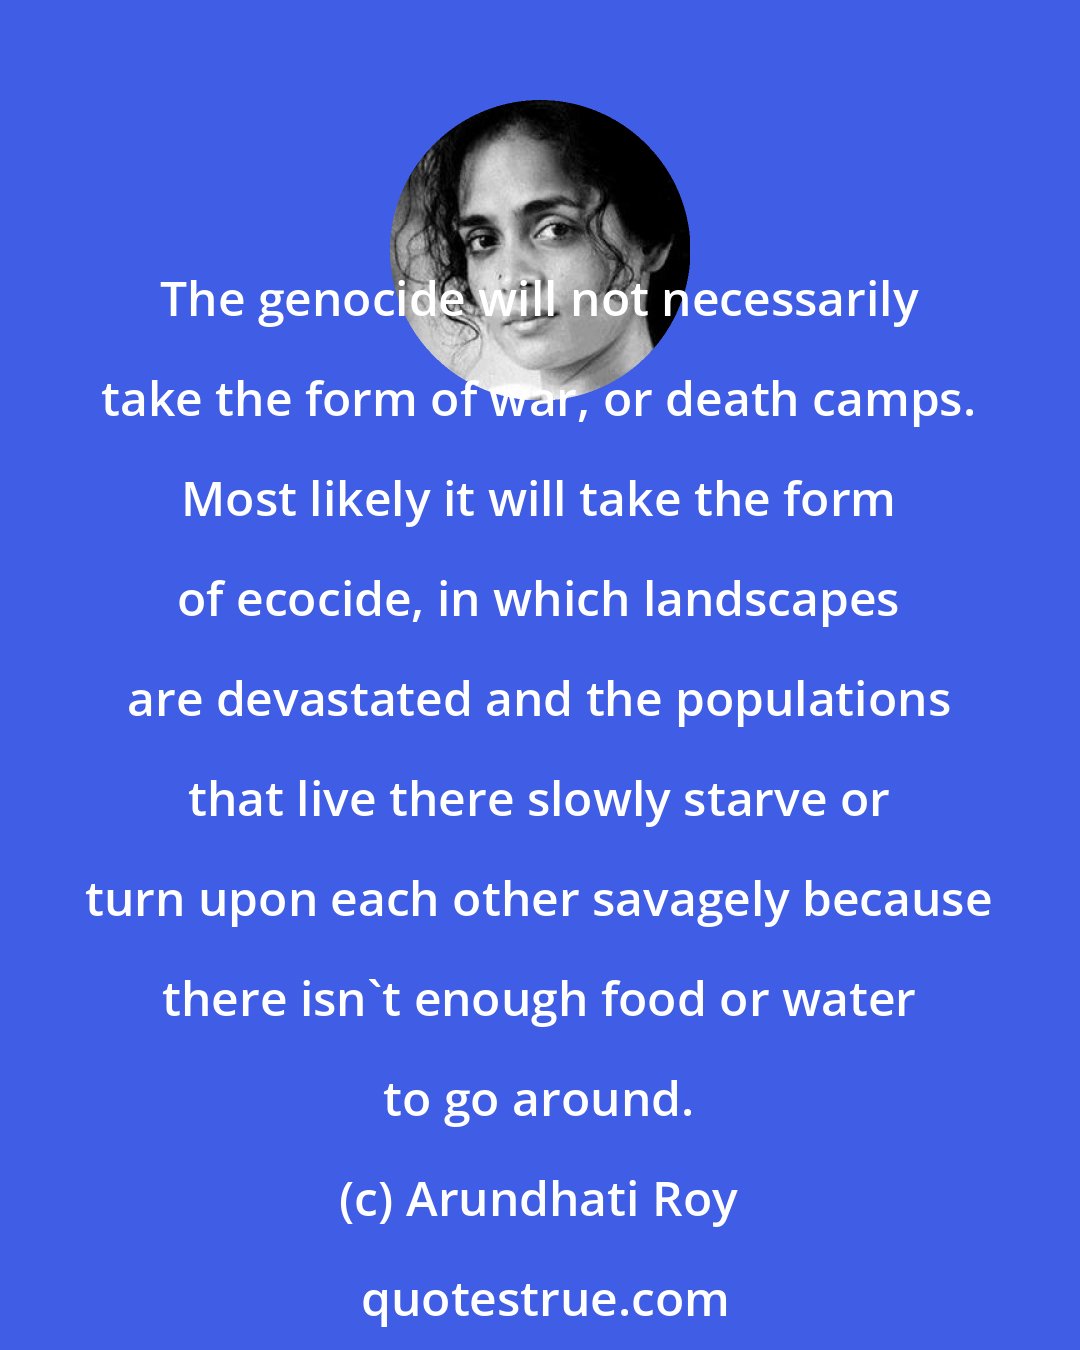 Arundhati Roy: The genocide will not necessarily take the form of war, or death camps. Most likely it will take the form of ecocide, in which landscapes are devastated and the populations that live there slowly starve or turn upon each other savagely because there isn't enough food or water to go around.